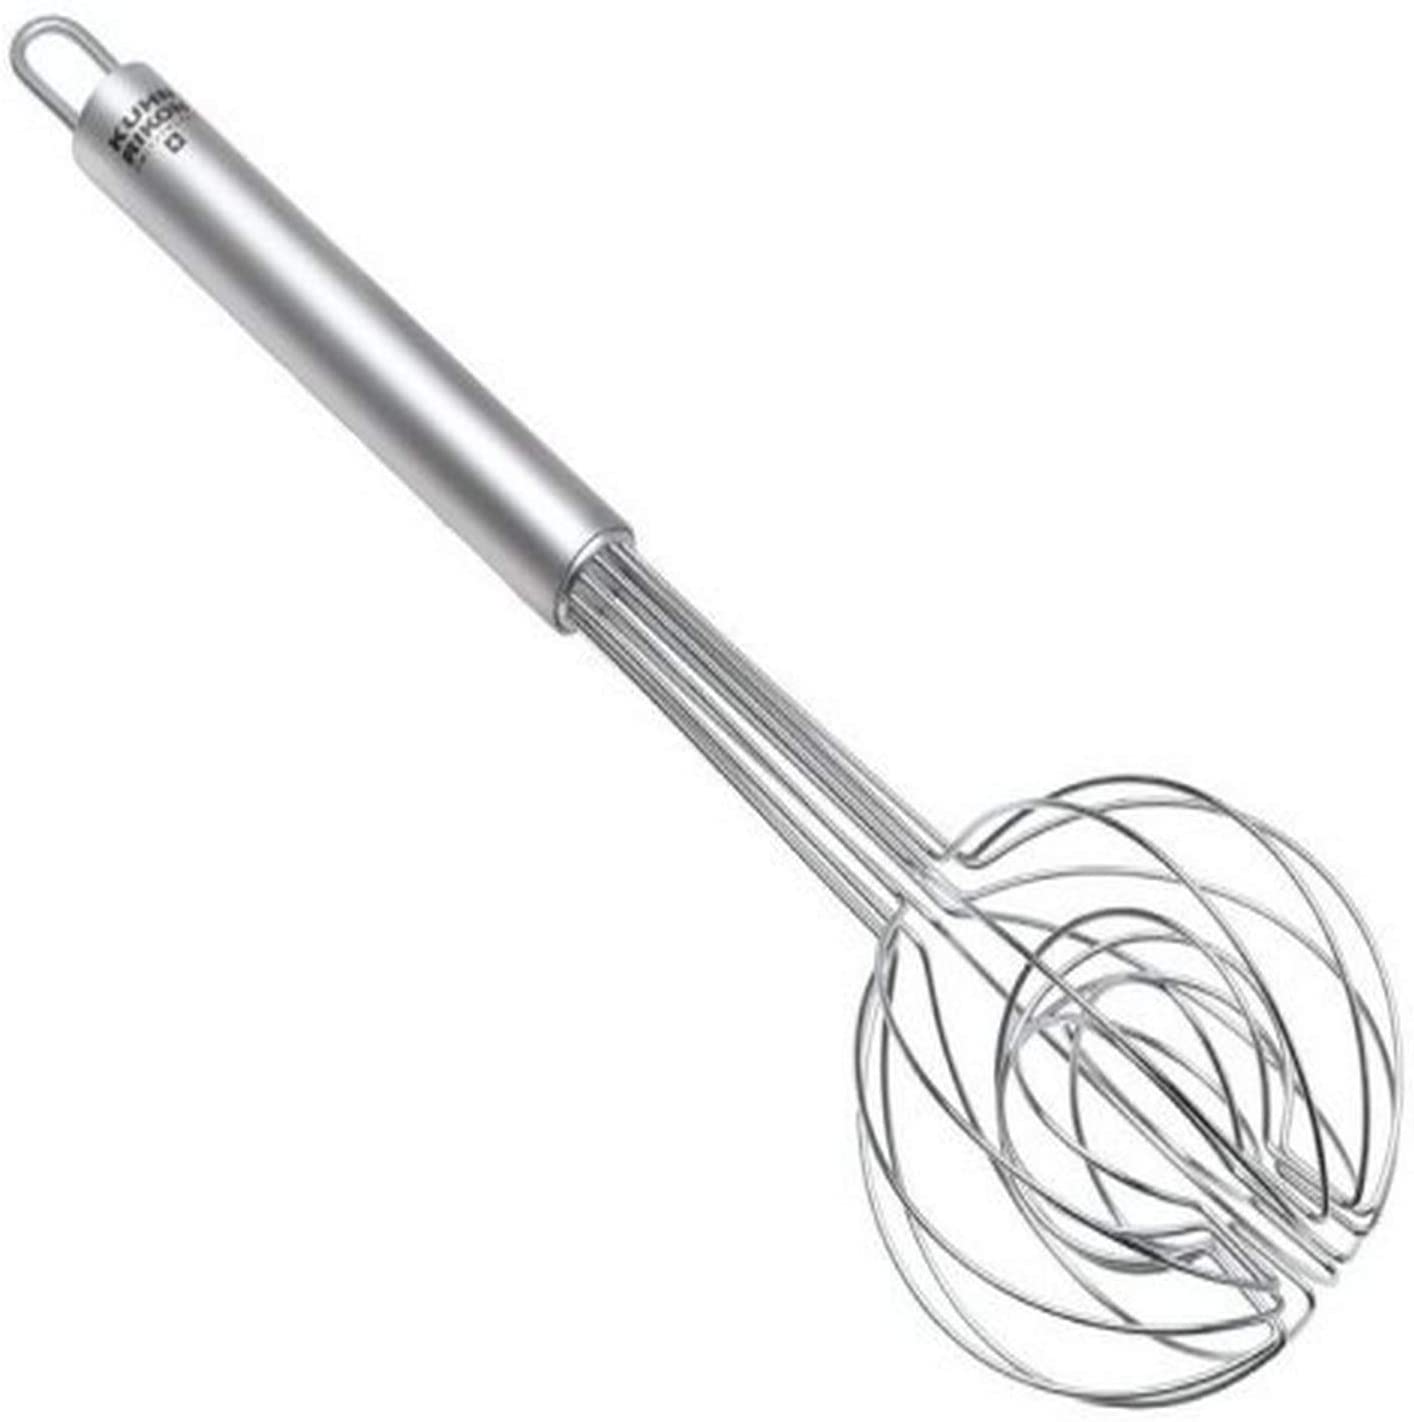 Types of Whisks: Double Balloon whisk